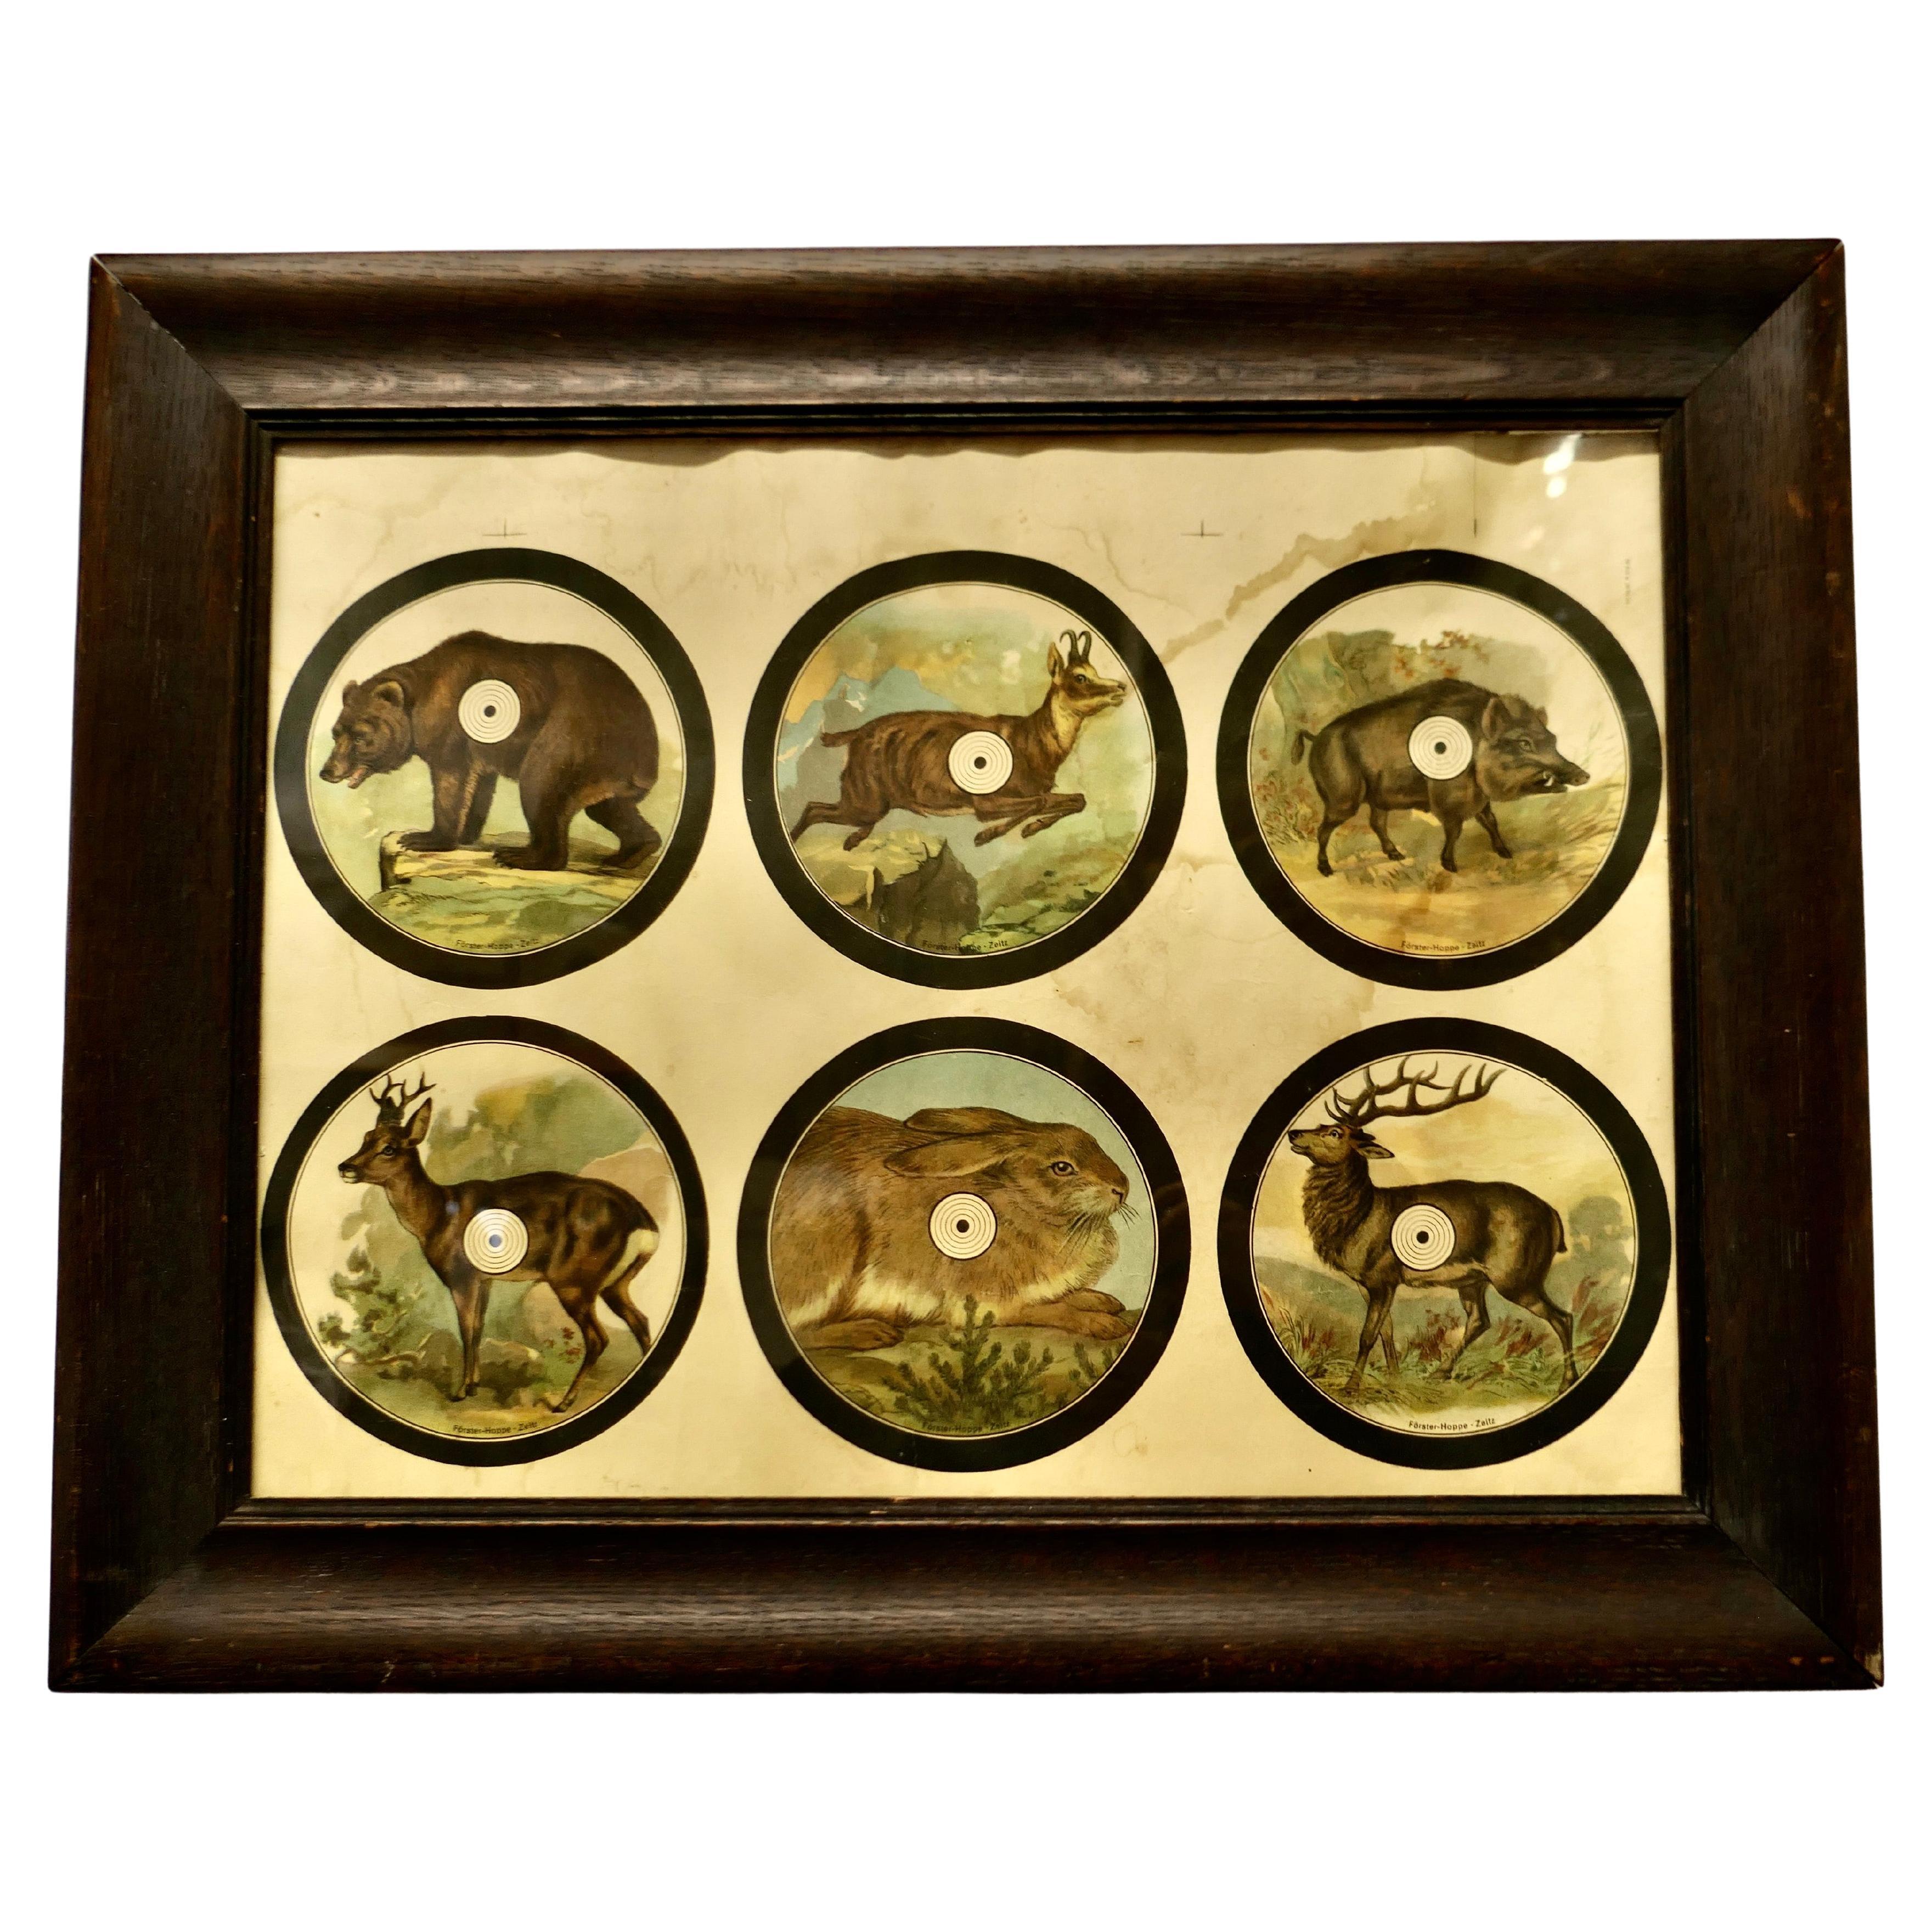 Framed Set of Black Forest Hunting/Shooting Targets This Is a Charming Set